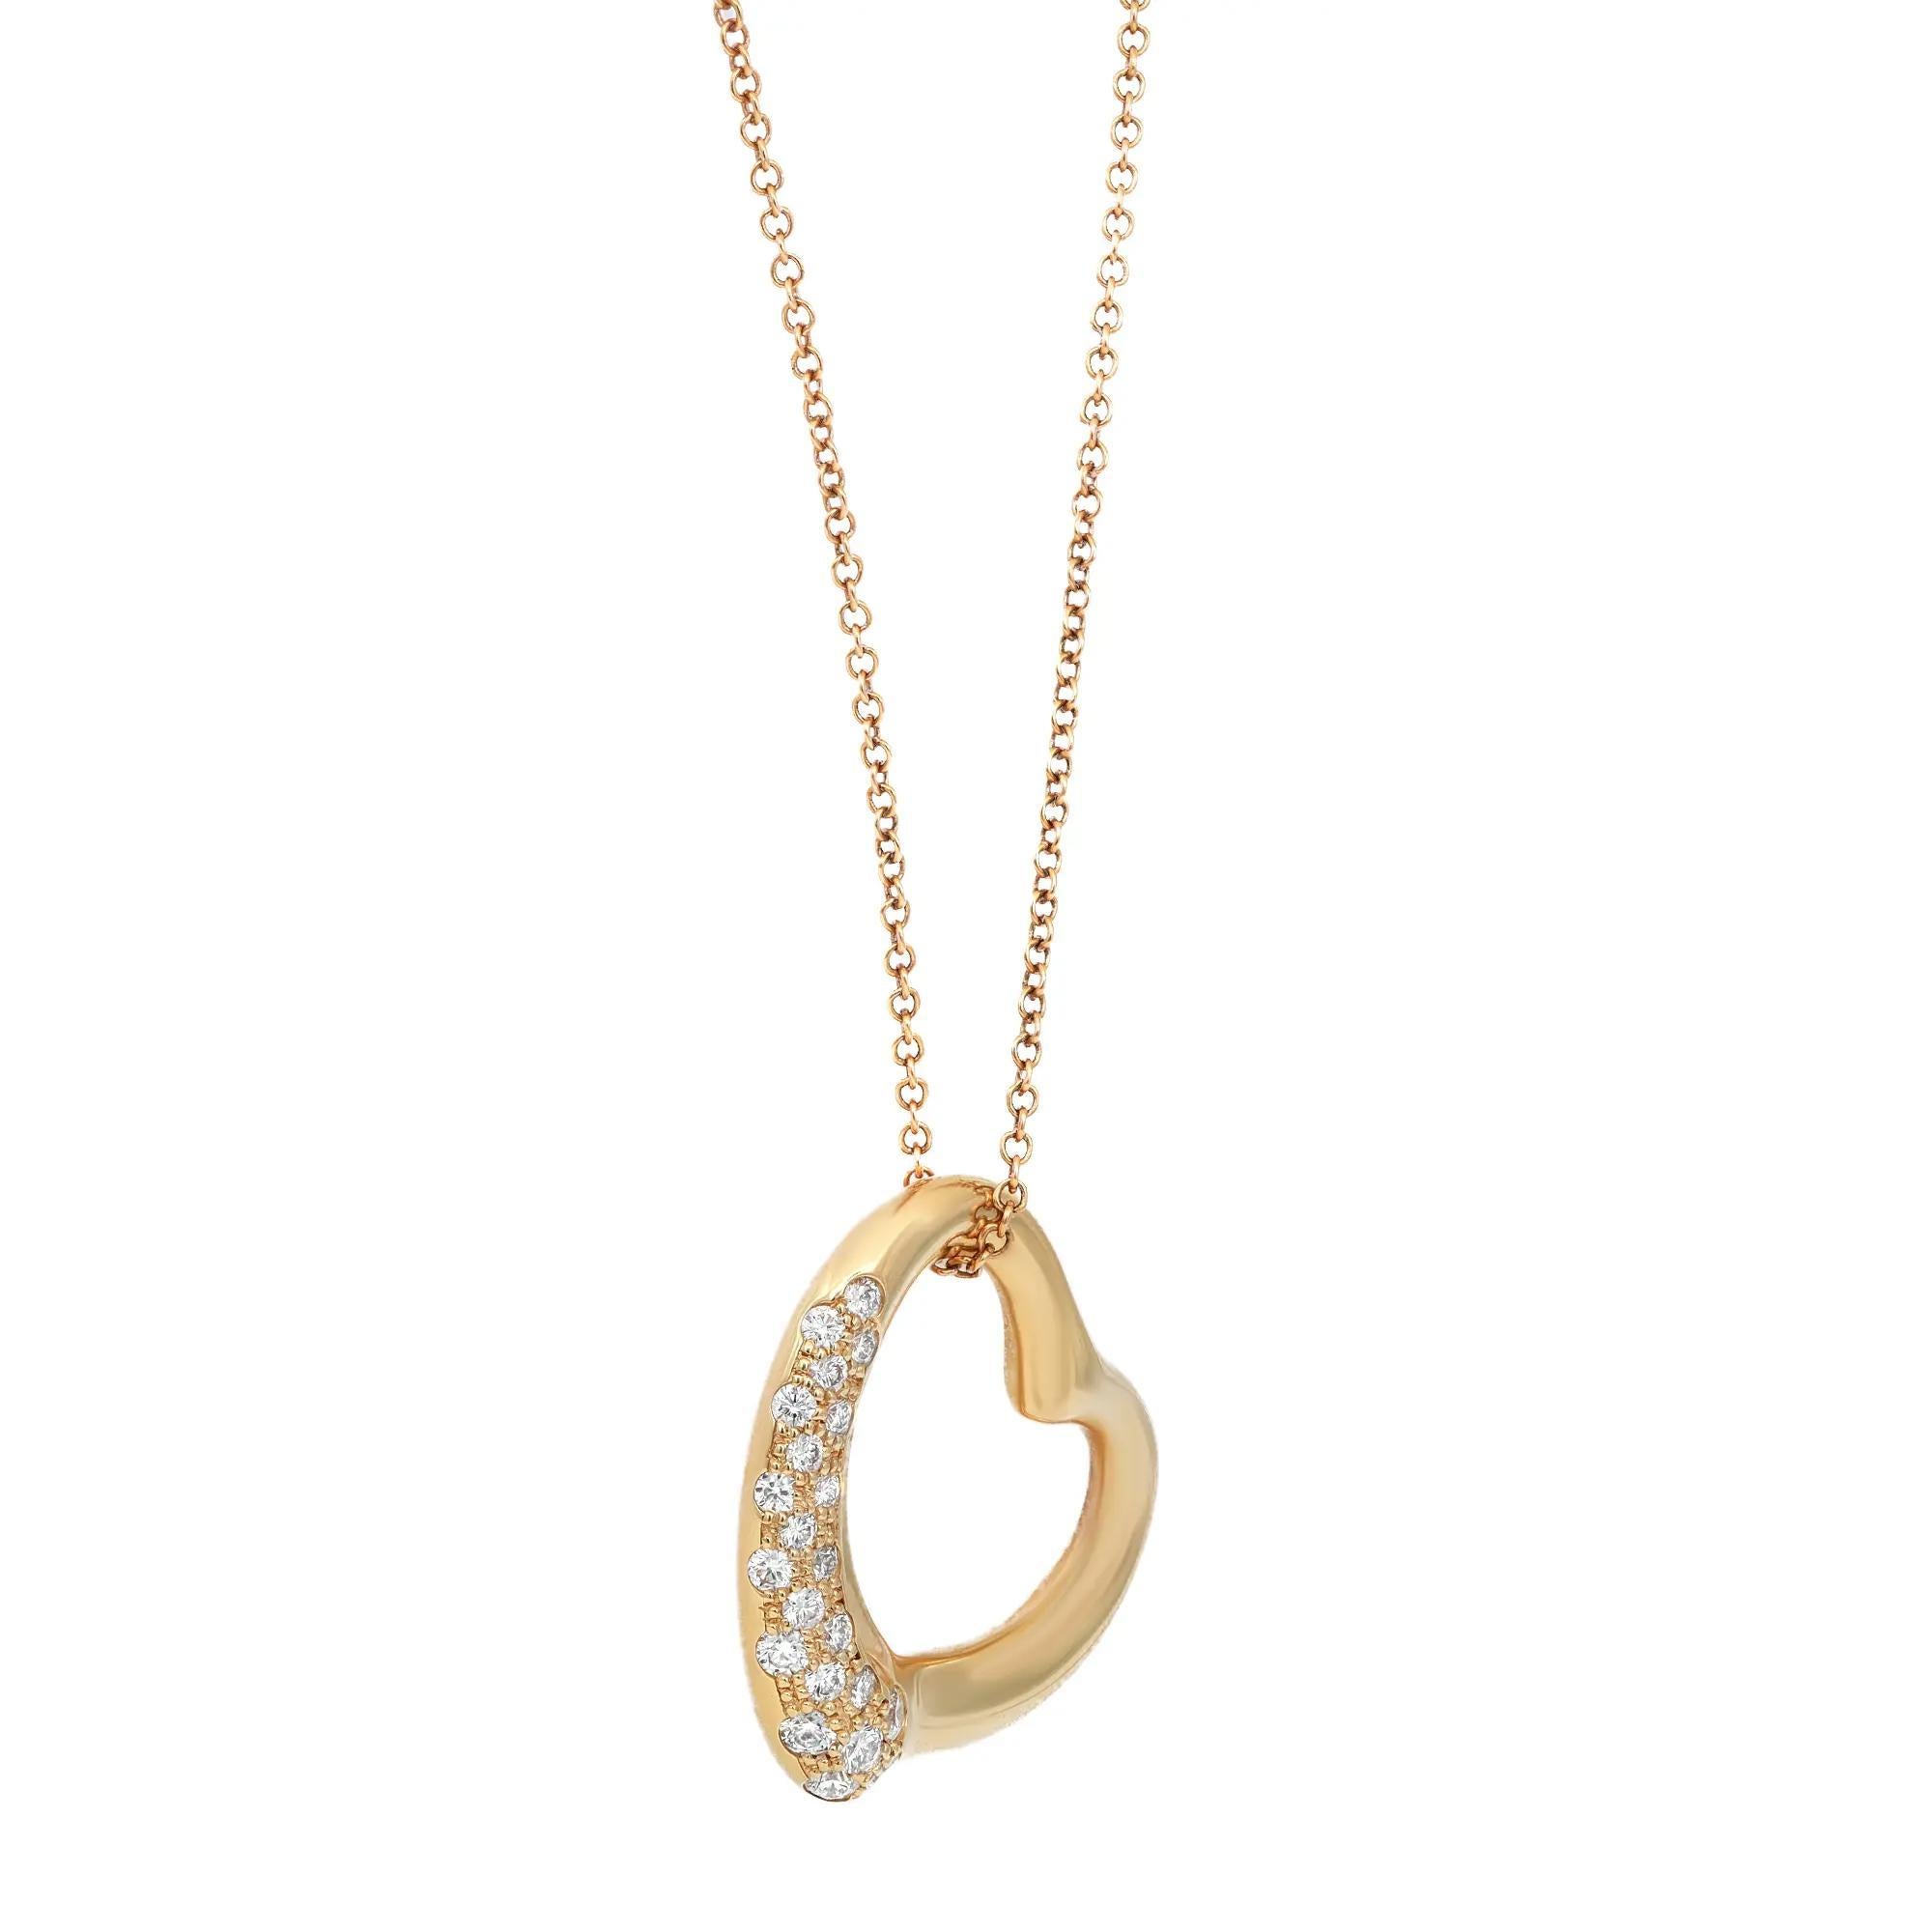 Tiffany & Co. Elsa Peretti open heart diamond pendant. This design celebrates the spirit of love. Shimmering diamonds accentuate the elegant curves of this pendant. Crafted in 18k yellow gold with pave set round brilliant cut diamonds weighing